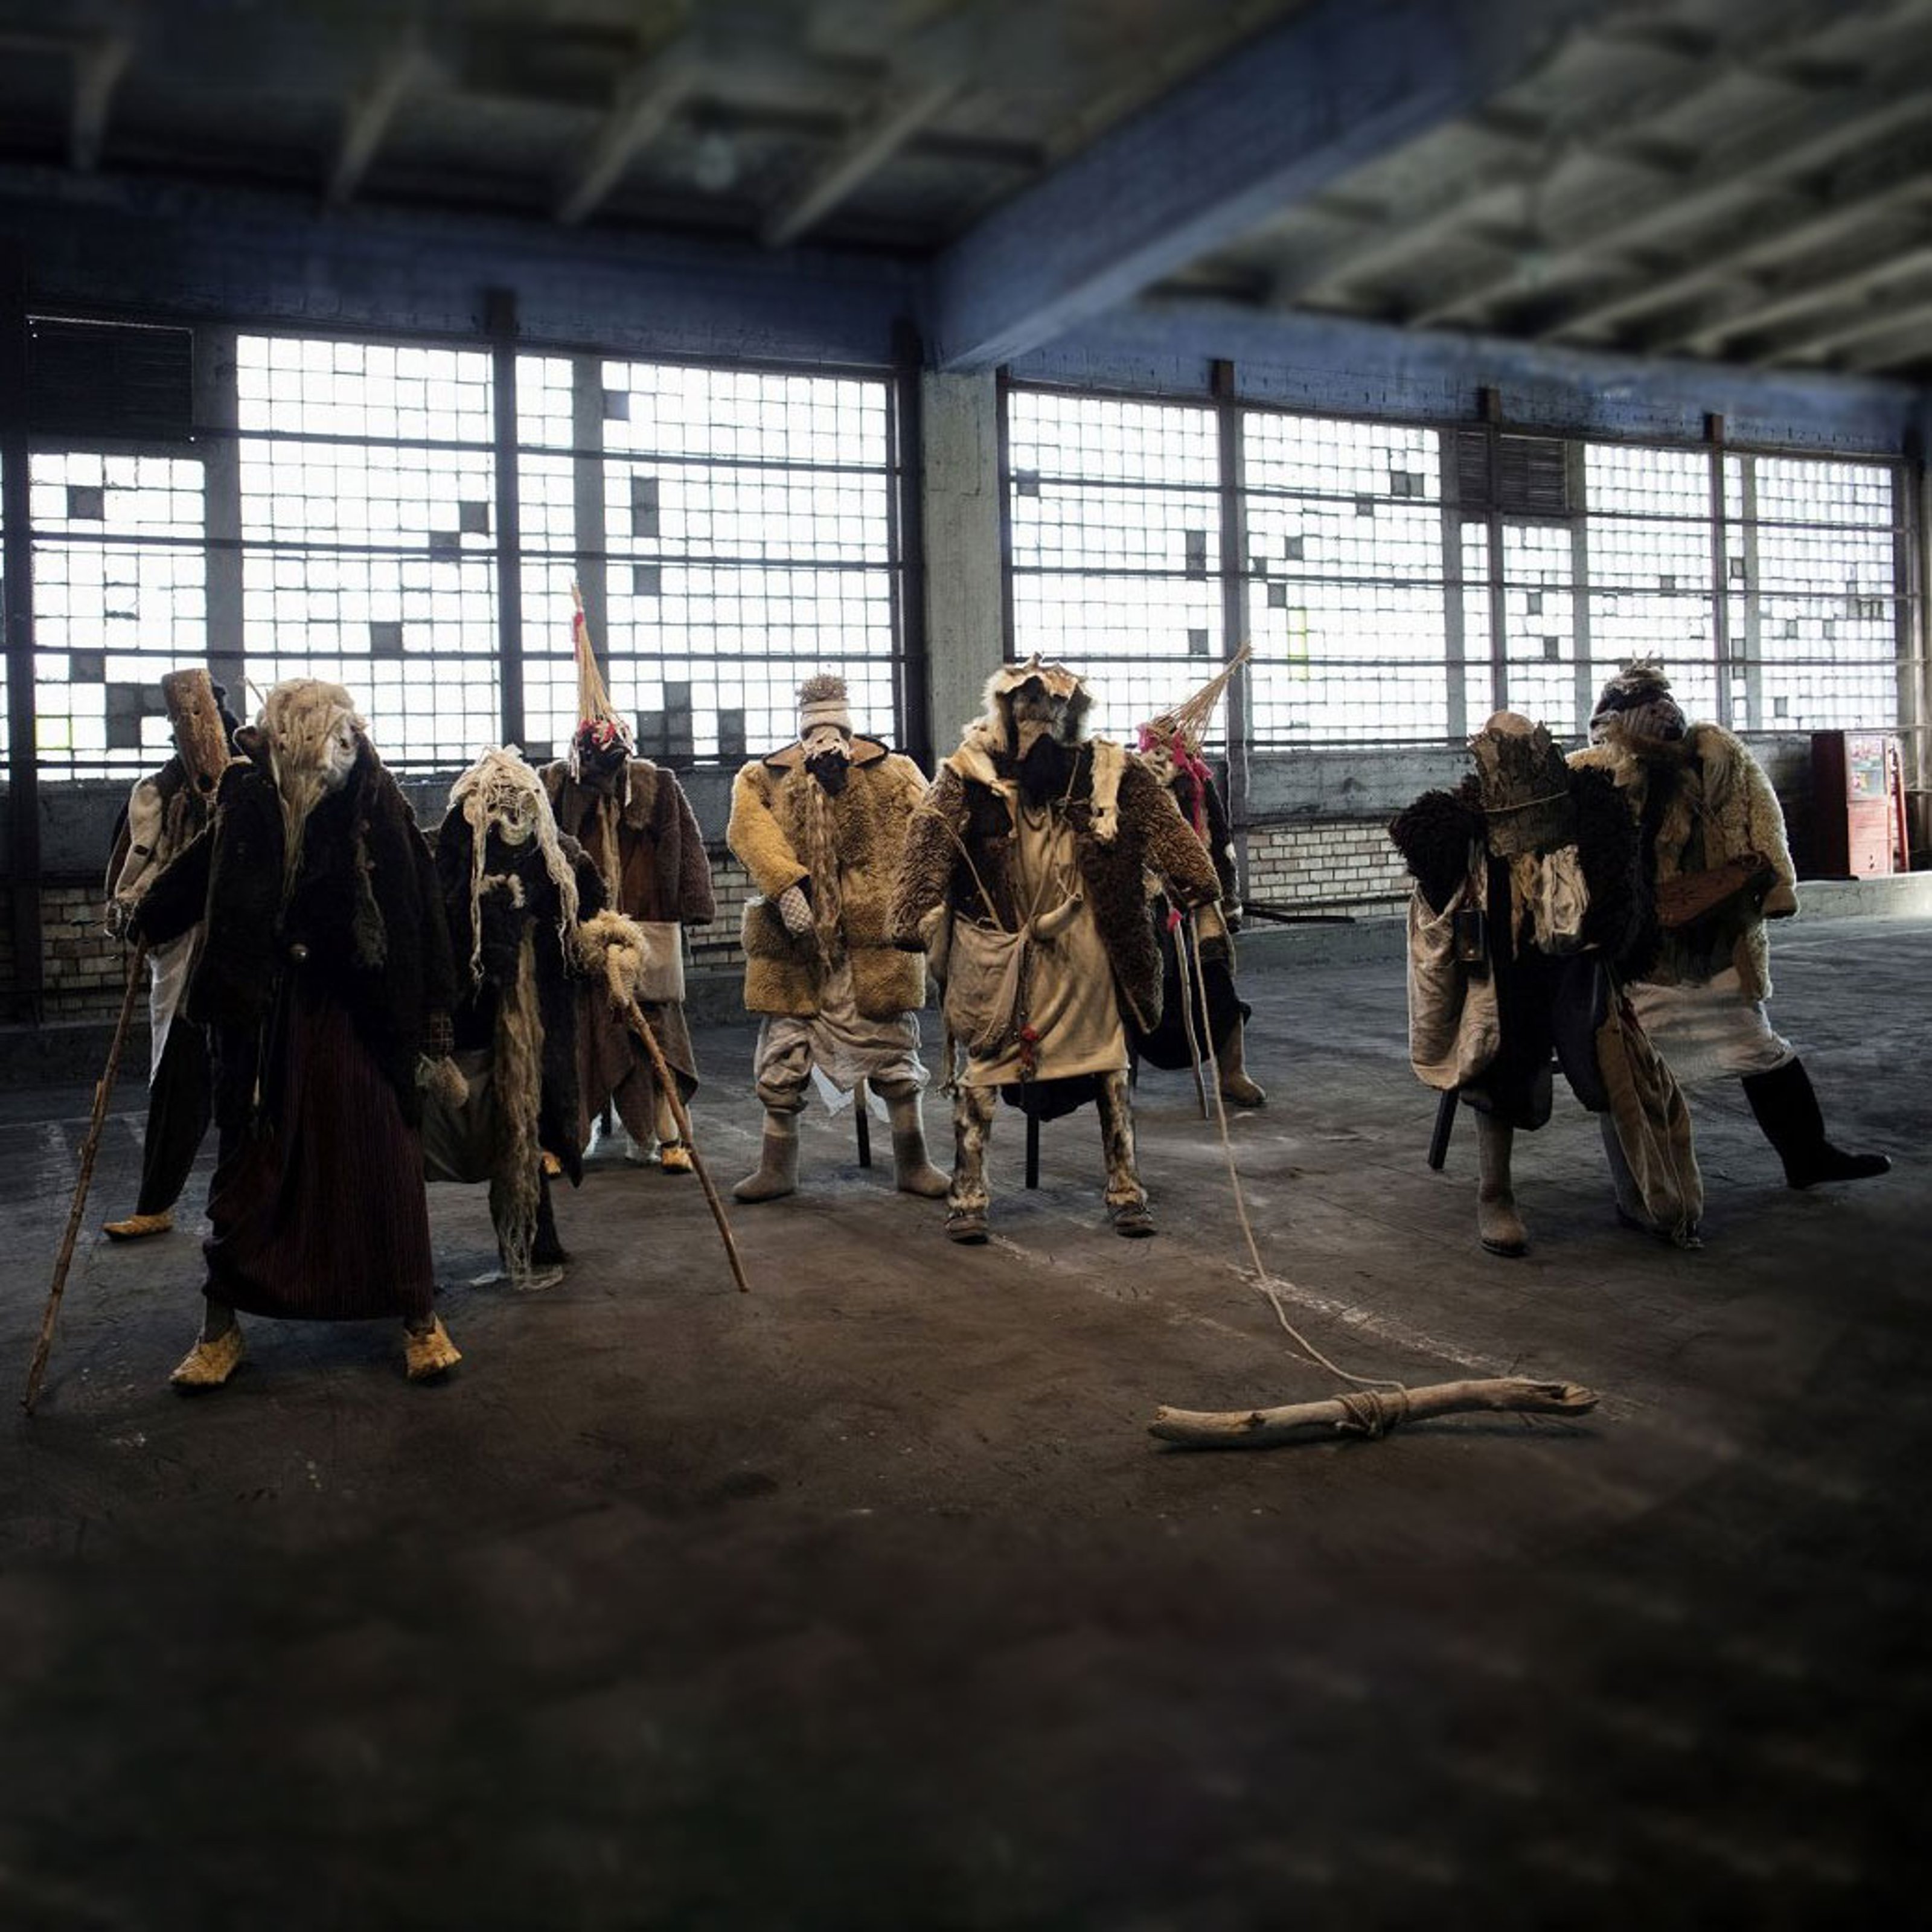 9 old and layered dressed mannequins standing in an old concrete space with large windows.